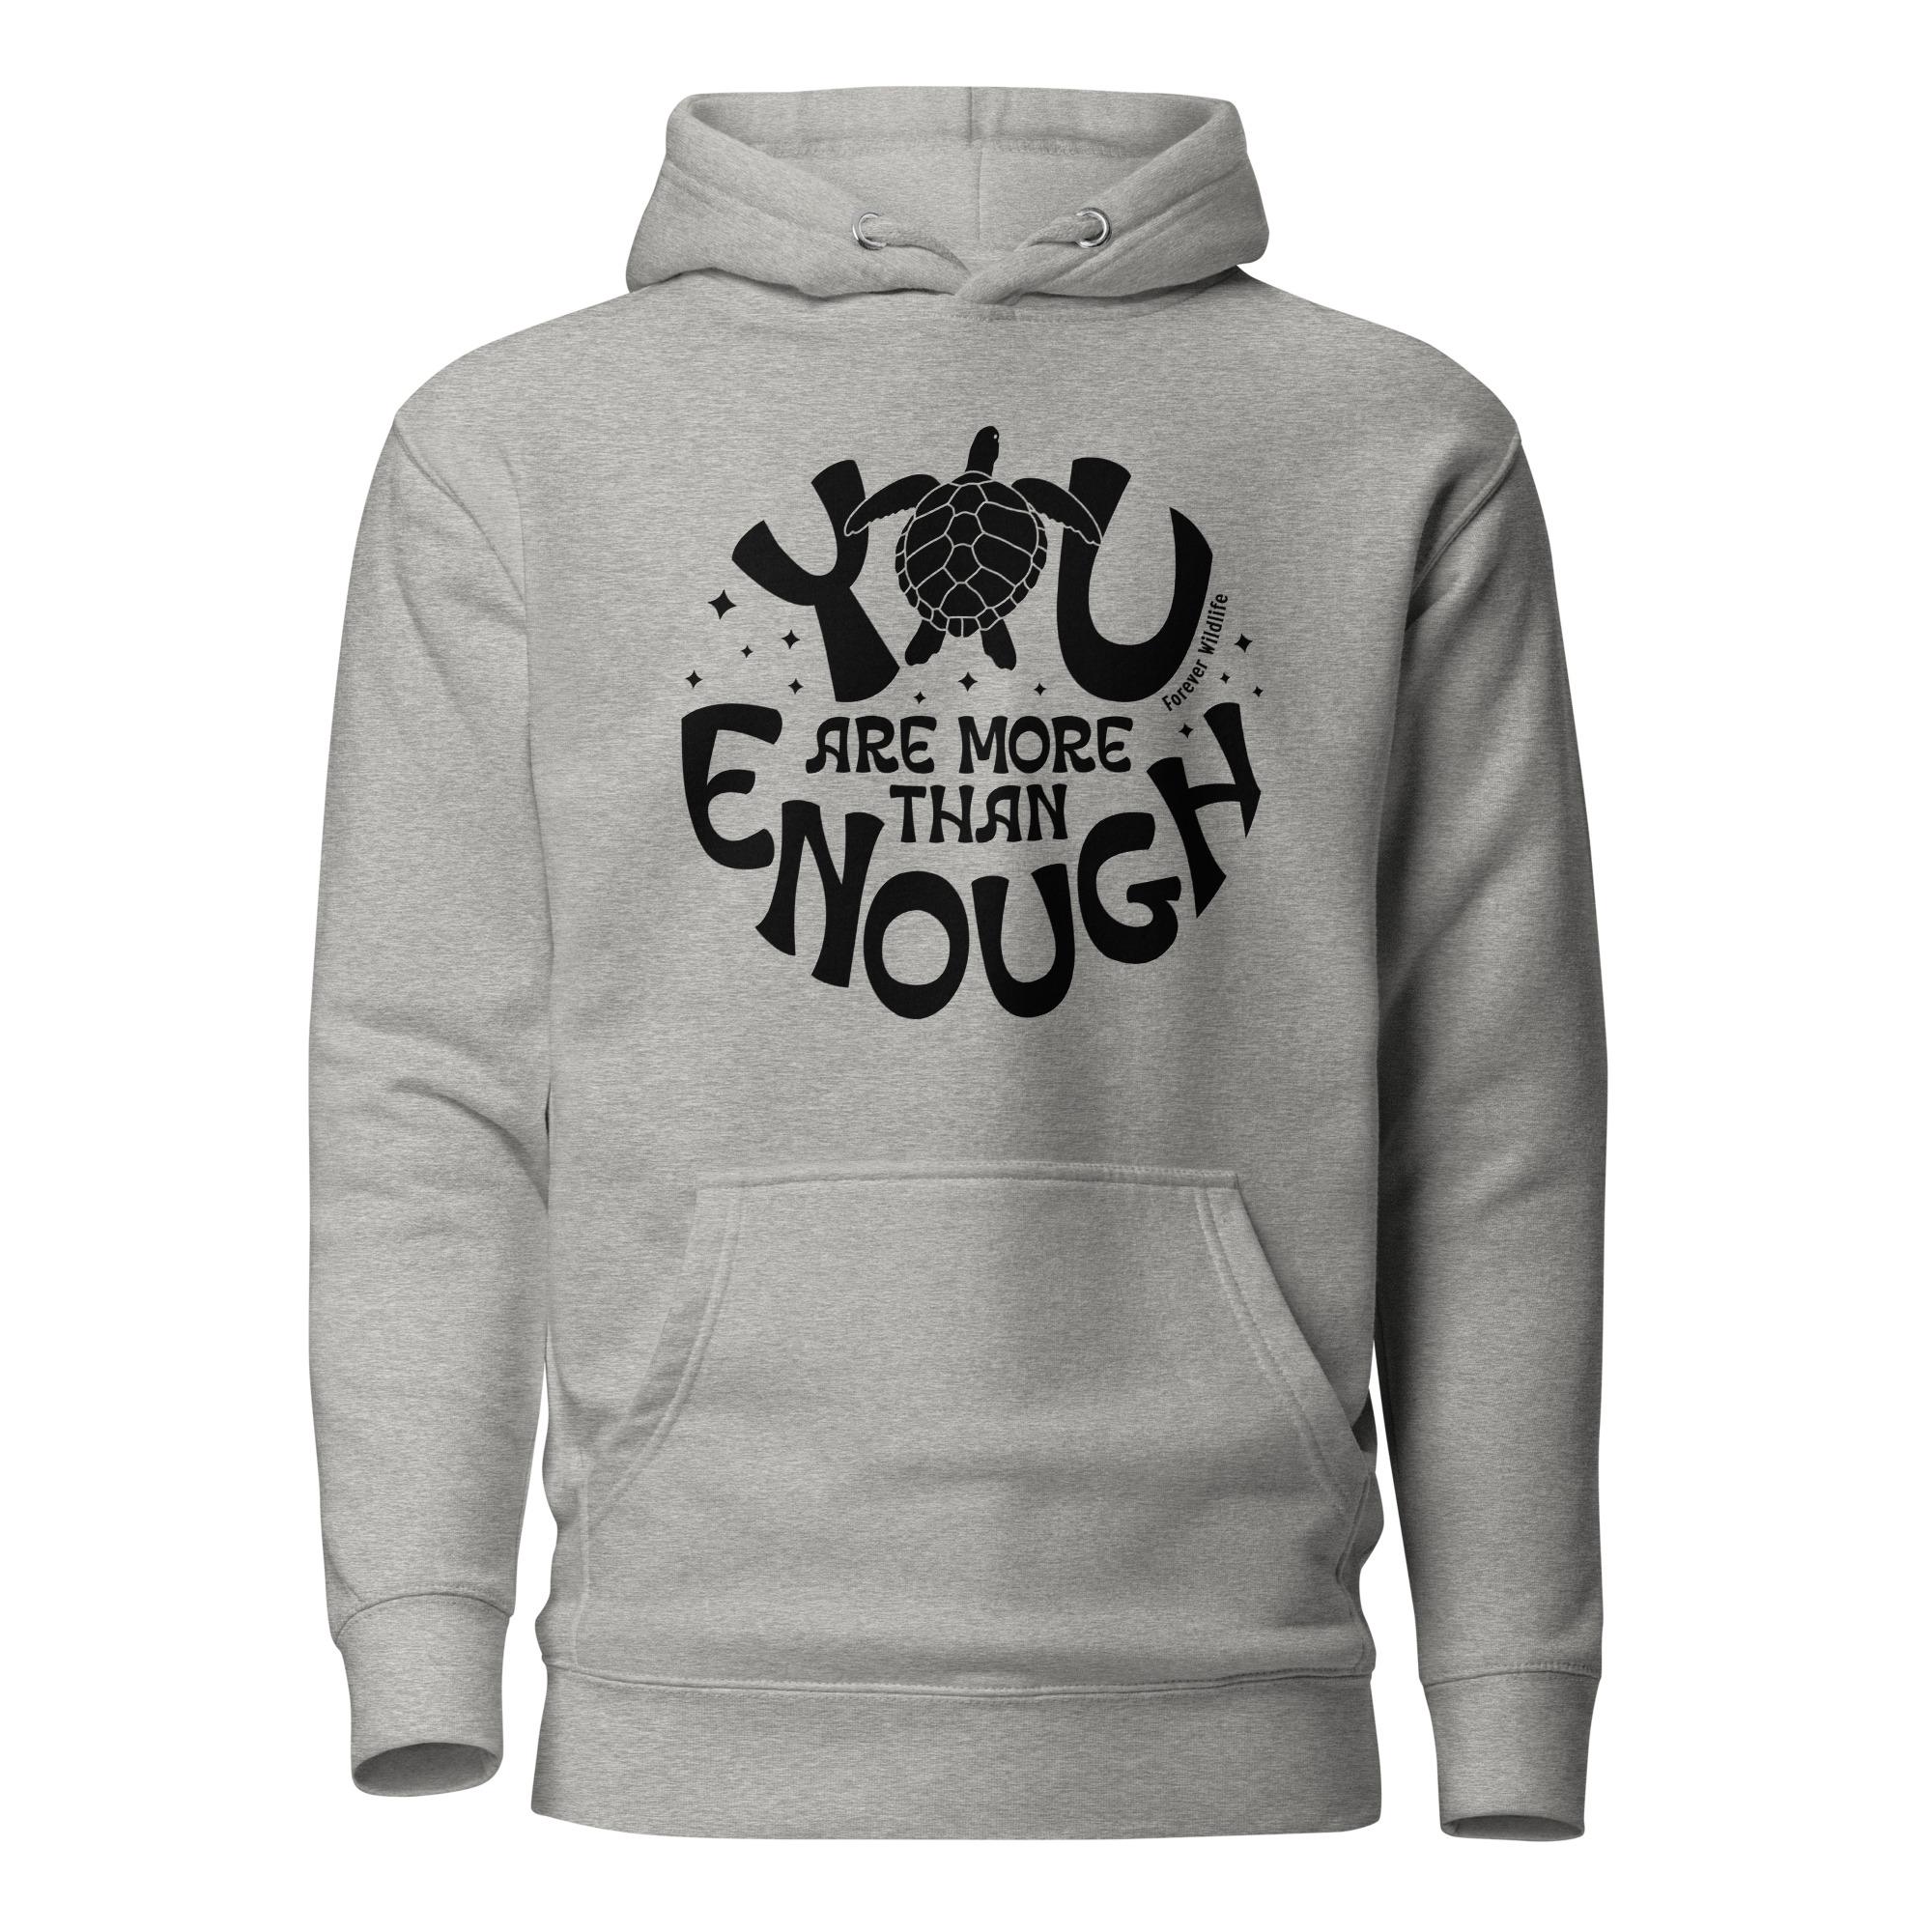 Sea Turtle Hoodie in Carbon Grey – Premium Wildlife Animal Inspirational Hoodie Design with YOu Are More Than Enough text, part of Wildlife Hoodies & Clothing from Forever Wildlife